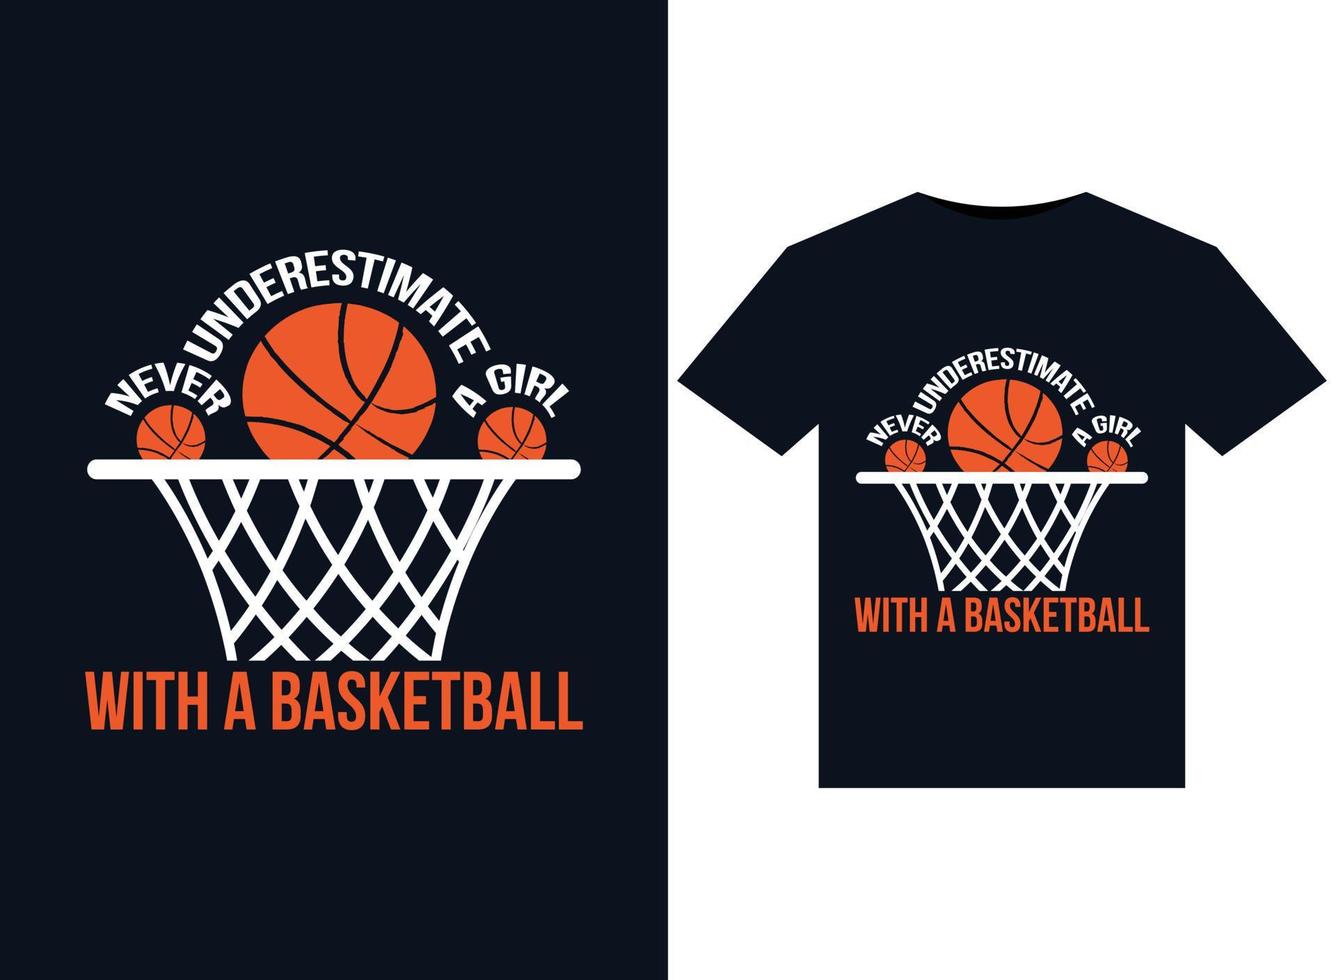 Never Underestimate A Girl With A Basketball illustrations for the print-ready T-Shirts design vector